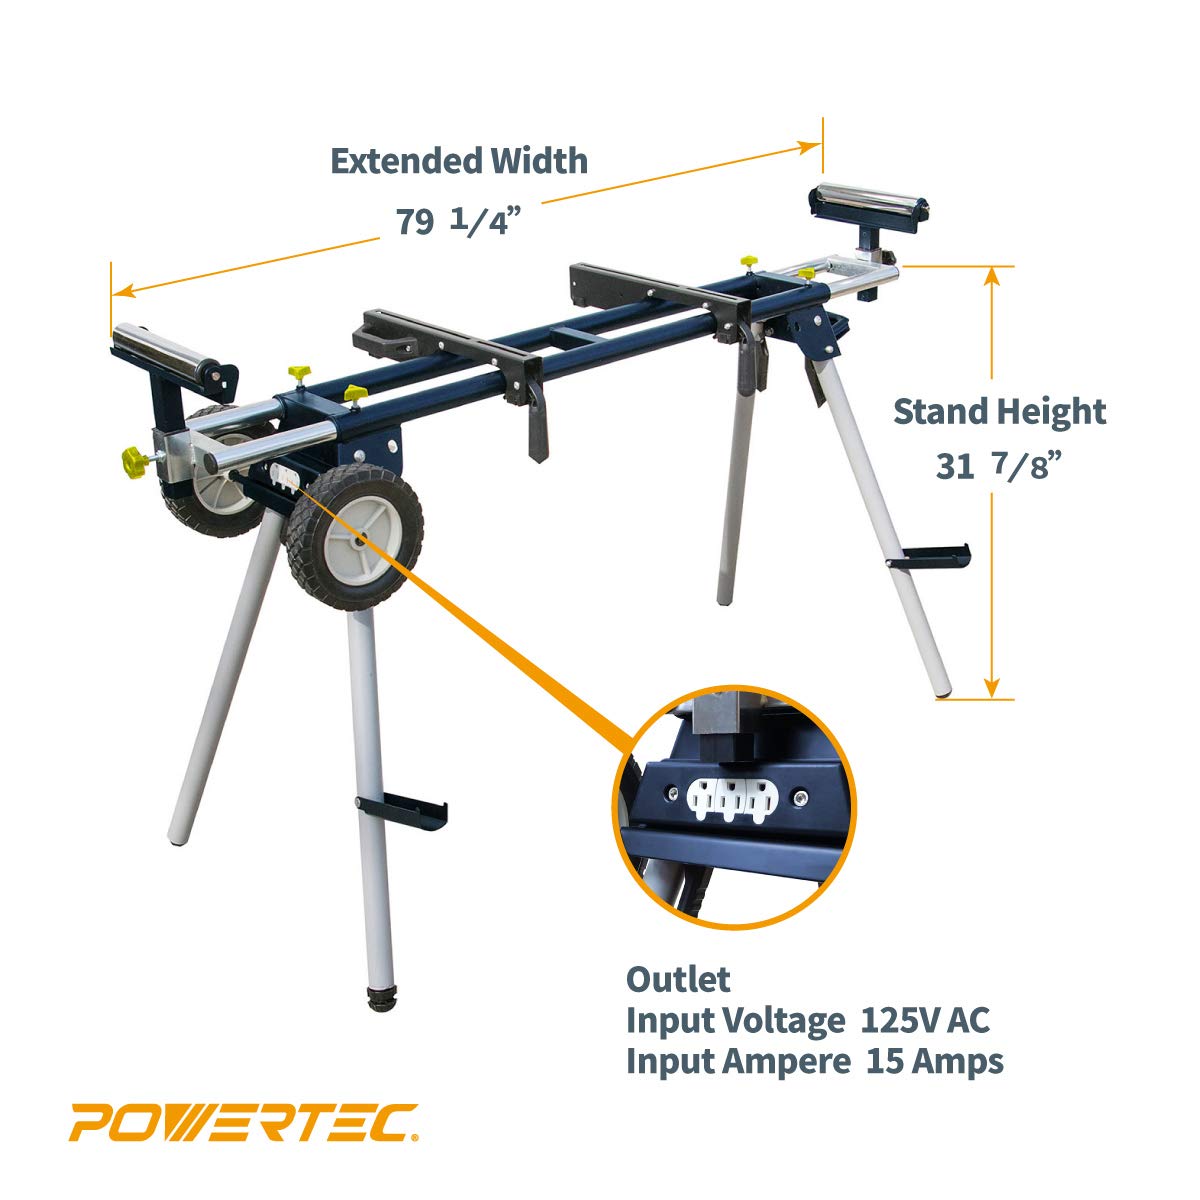 POWERTEC MT4000V Folding Miter Saw Stand with 8-Inch Wheels and 110V Power Outlets, Universal Quick-Release Brackets